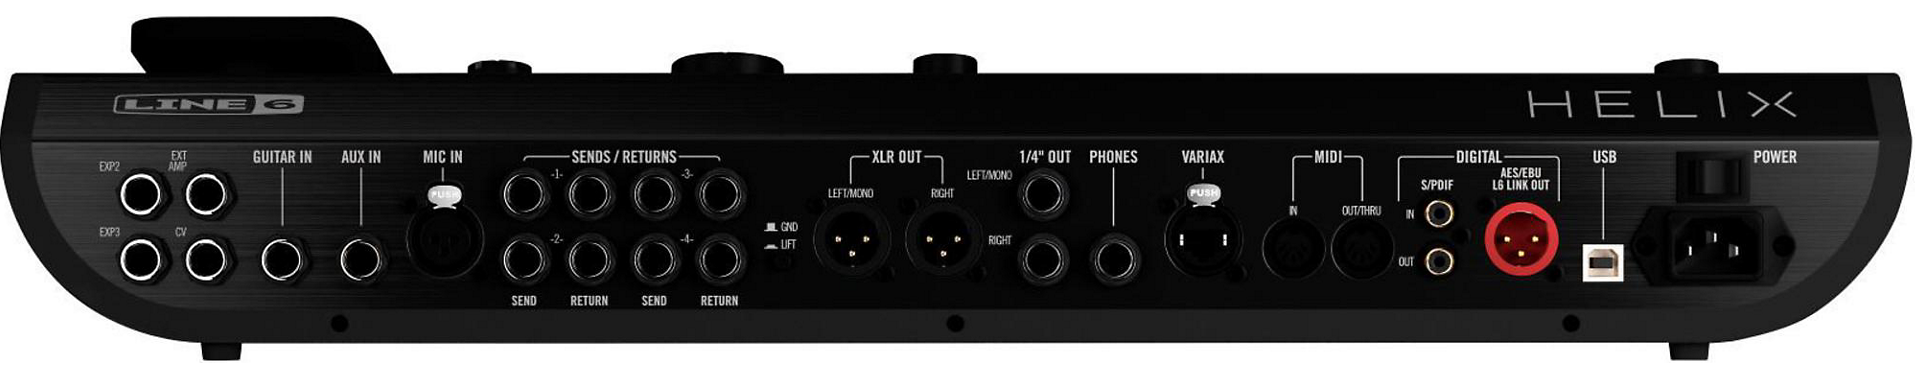 Review: Helix Guitar Processor by Line 6